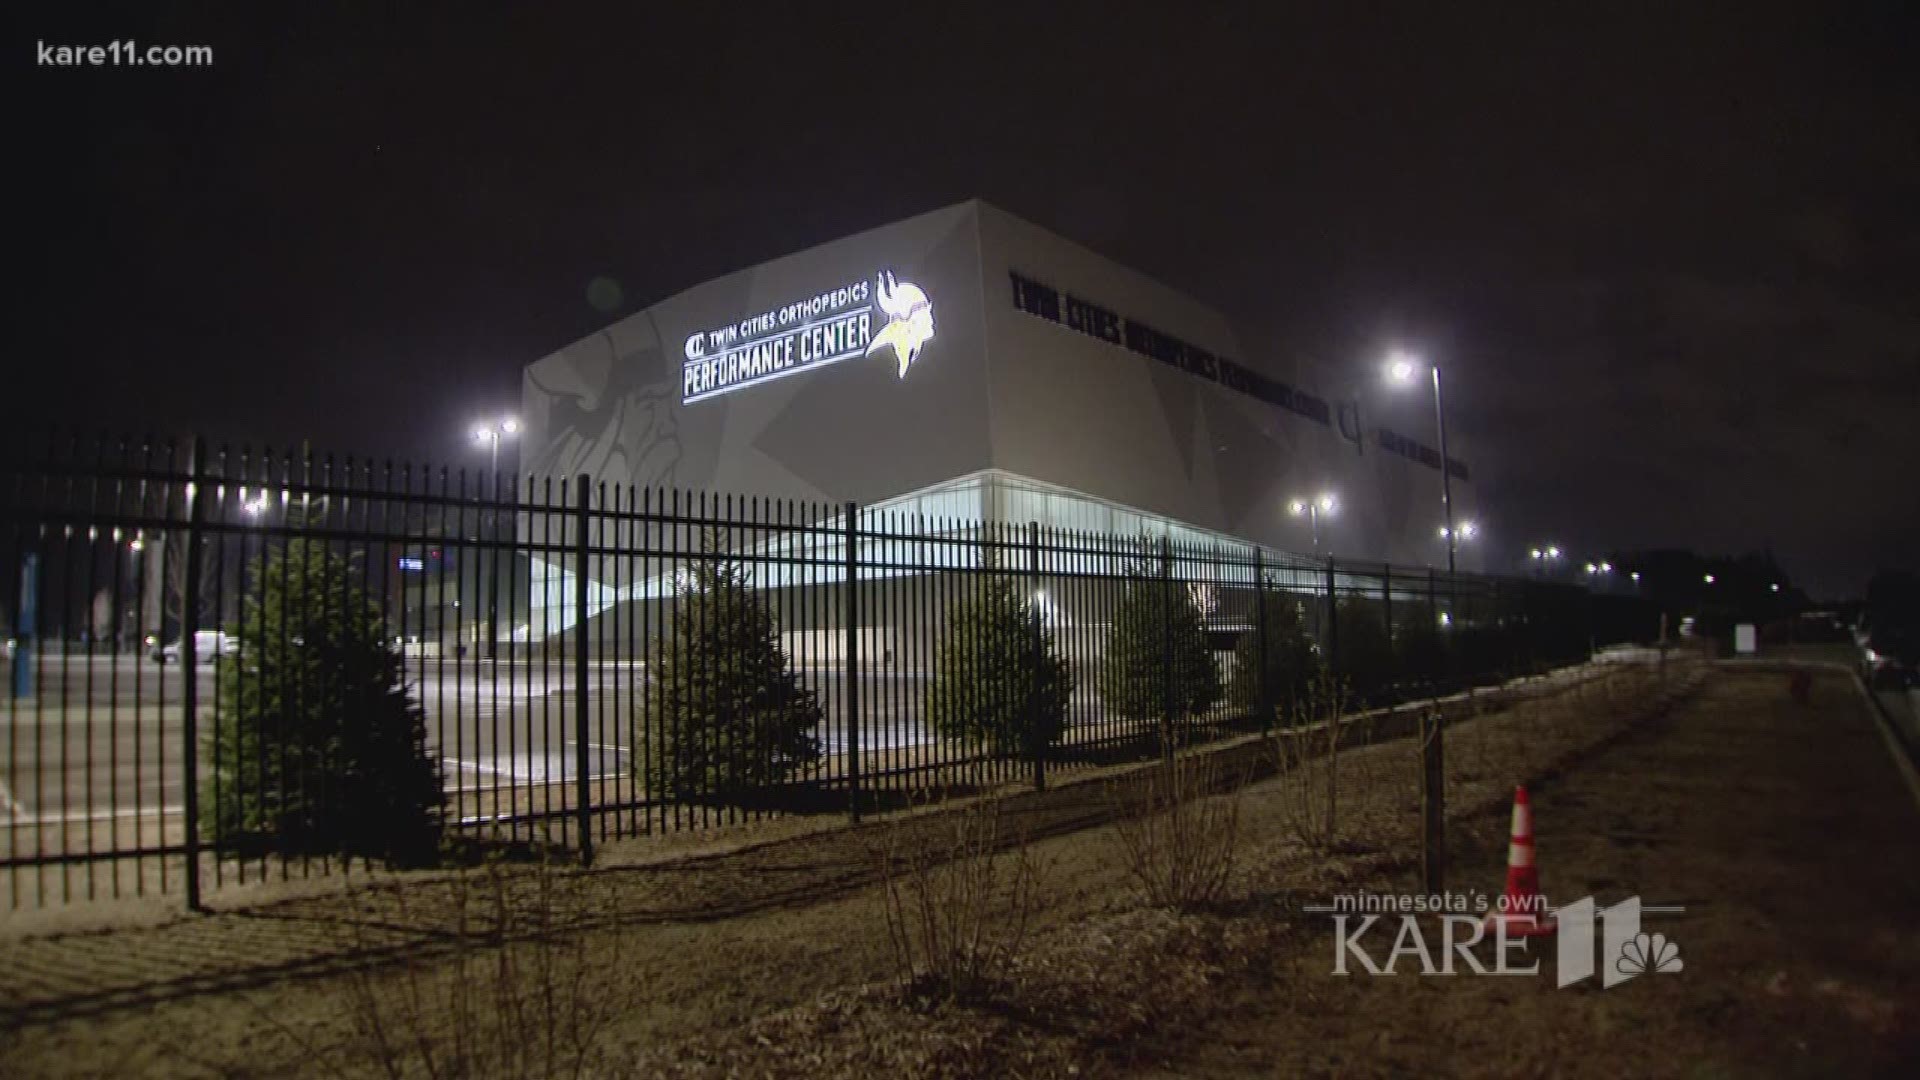 The Vikings have agreed to turn off the lights on the north side of their  new complex in Eagan after complaints from neighbors.